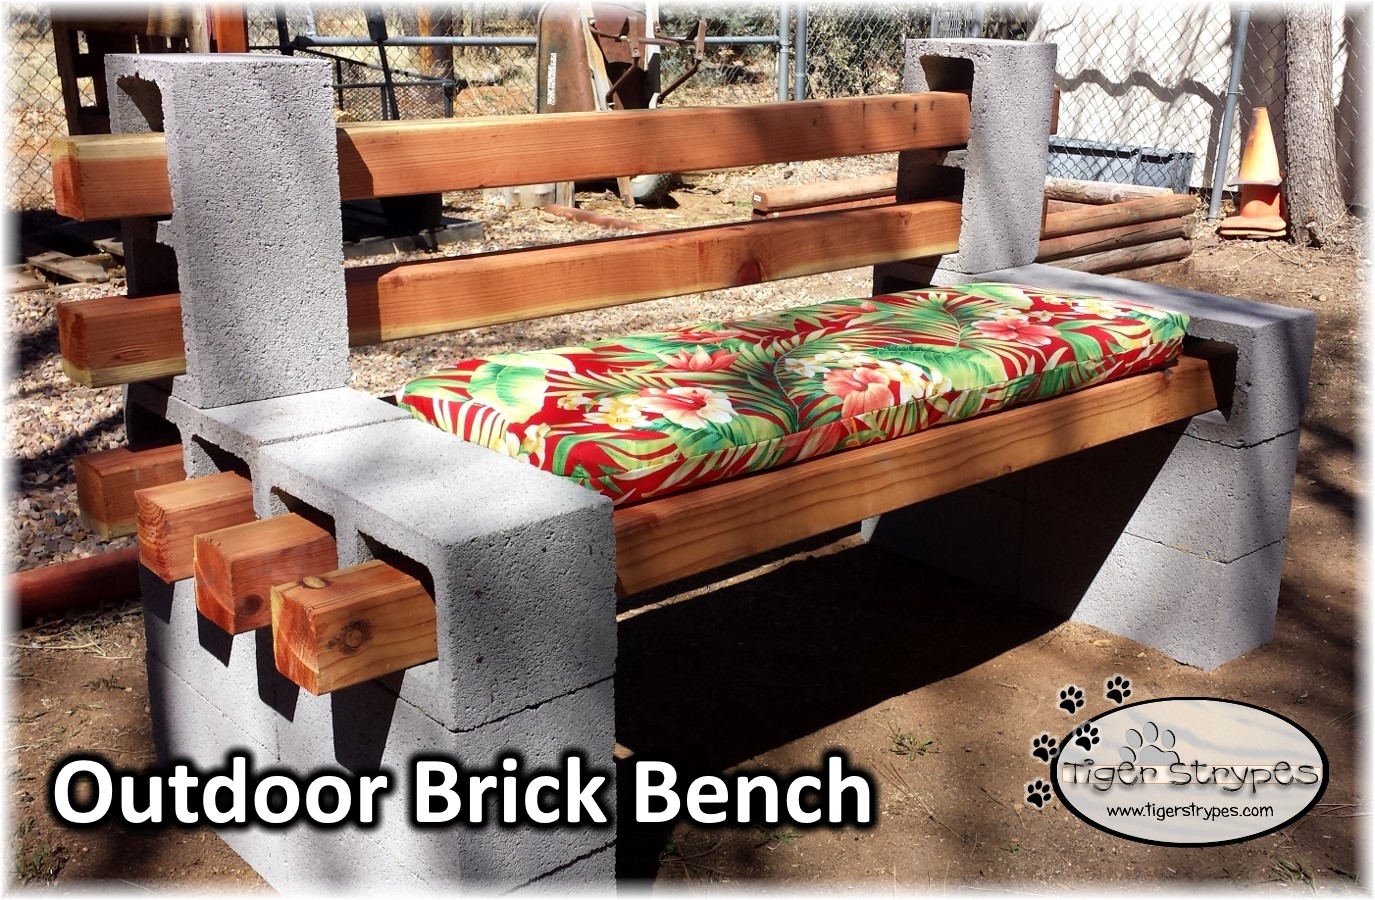 Learn How to Make an Outdoor Brick Bench #TigerStrypesBlog